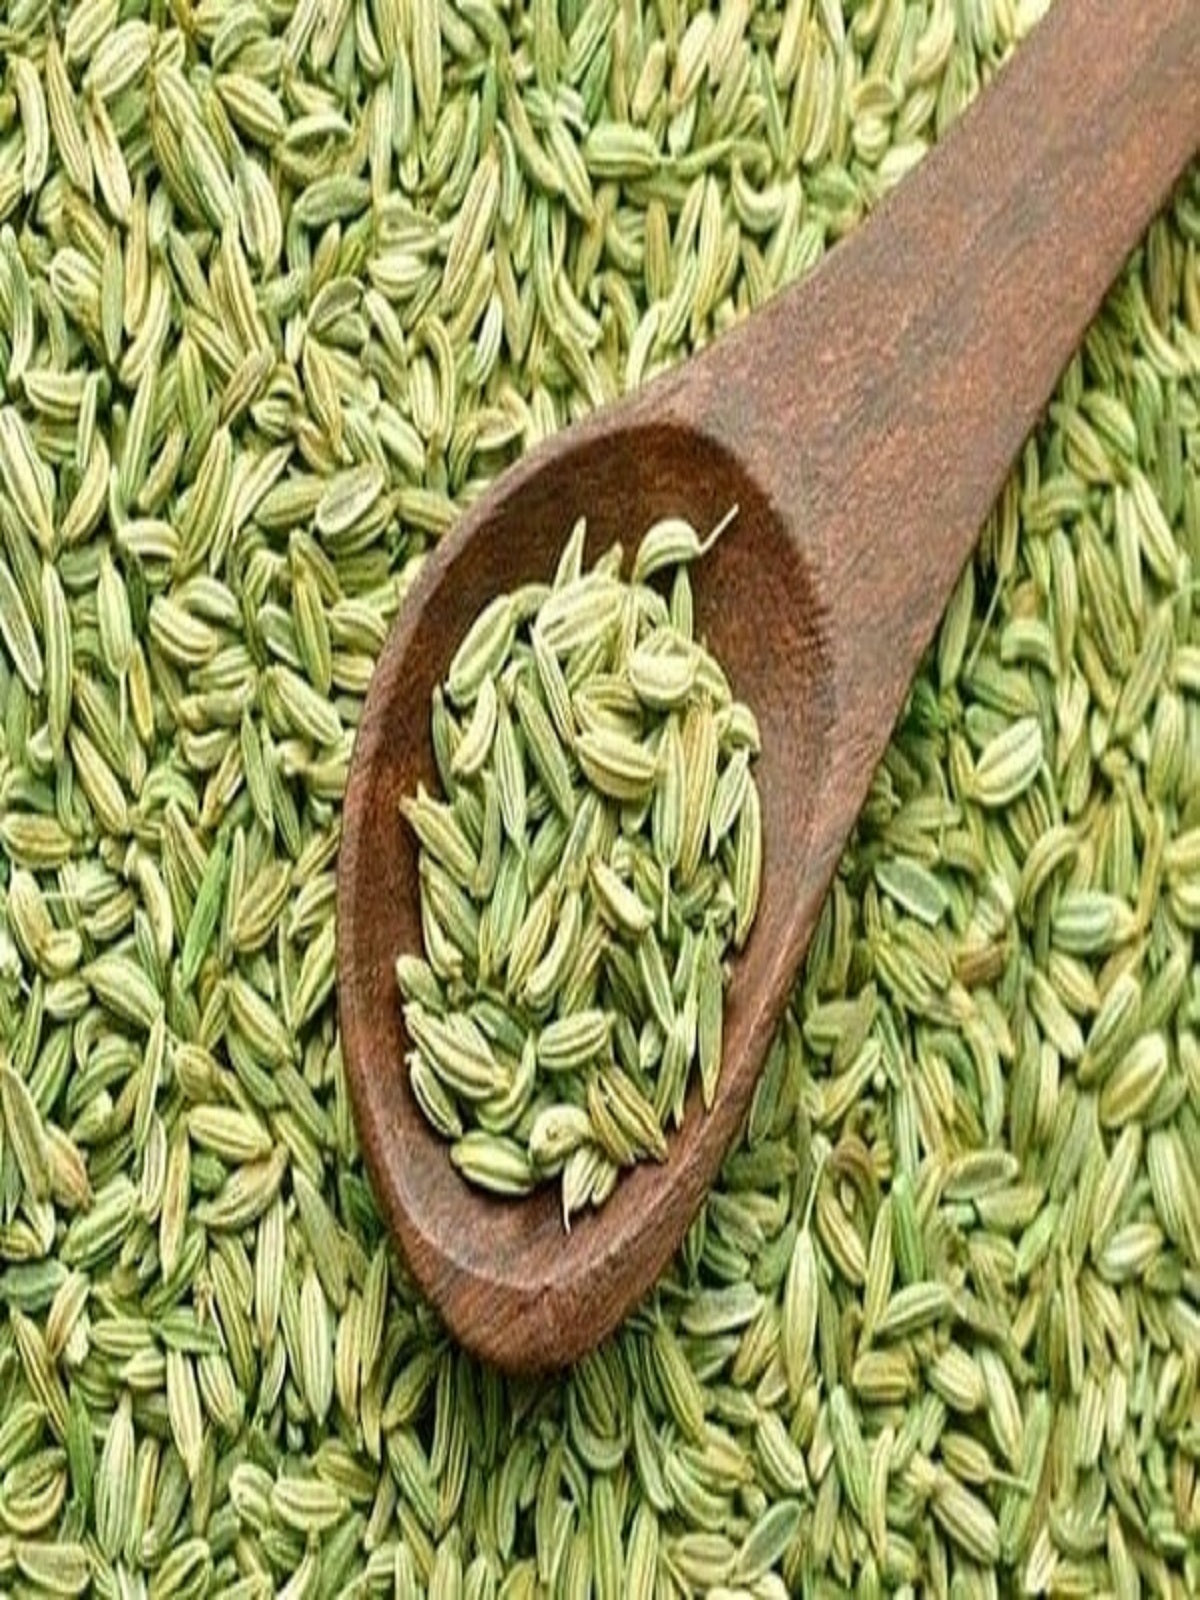 Buy the best quality small fennel seeds online at Farmonics